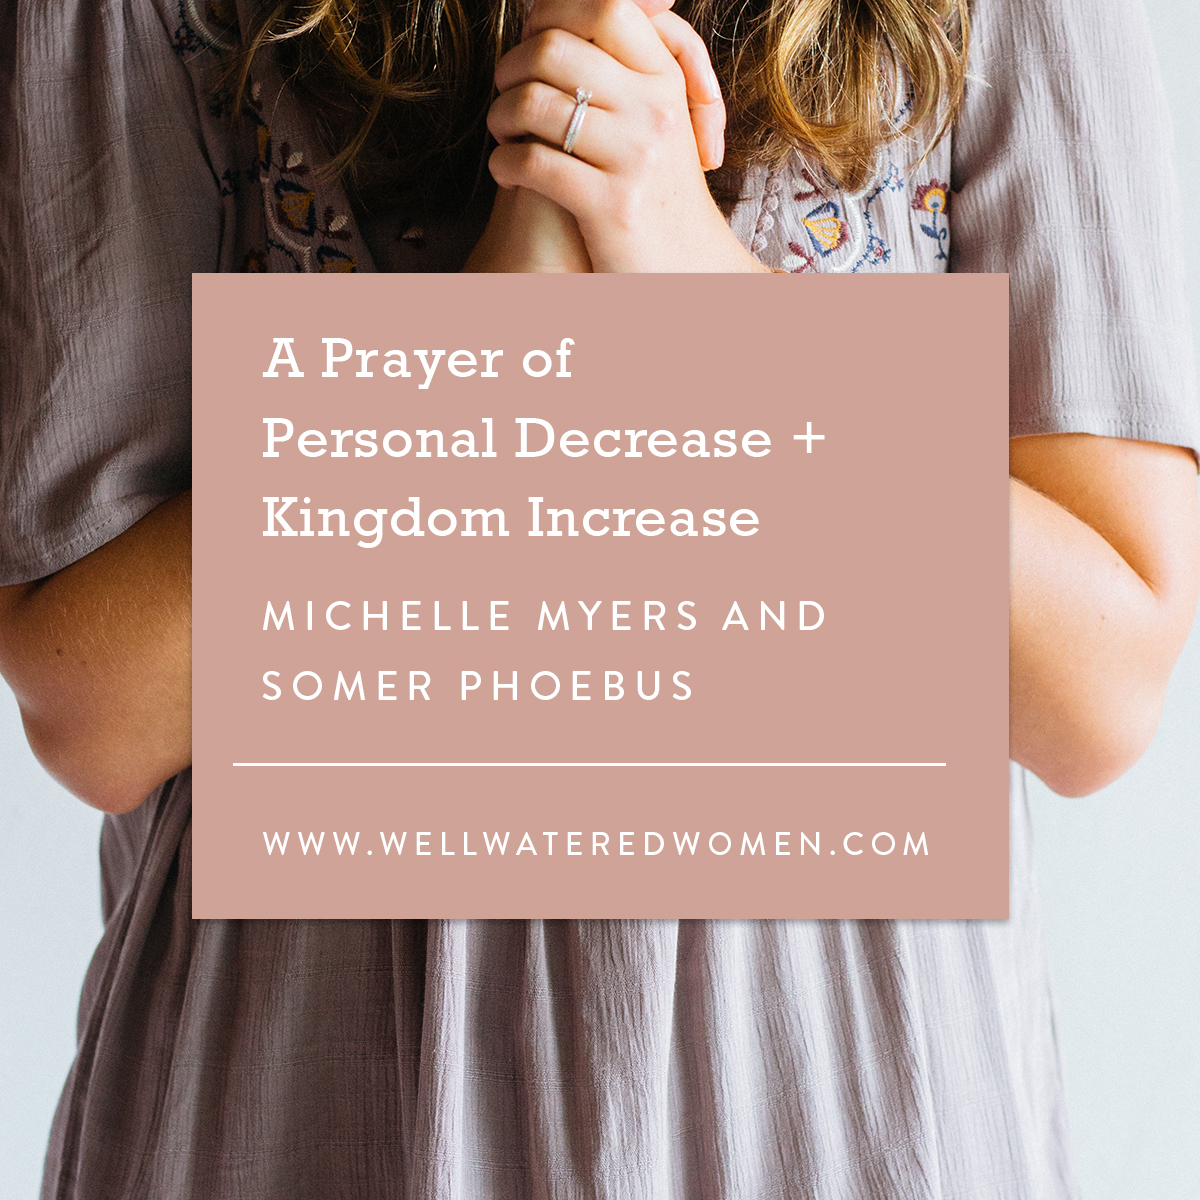 Personal Decrease, Kingdom Increase - an Article from Well-Watered Women